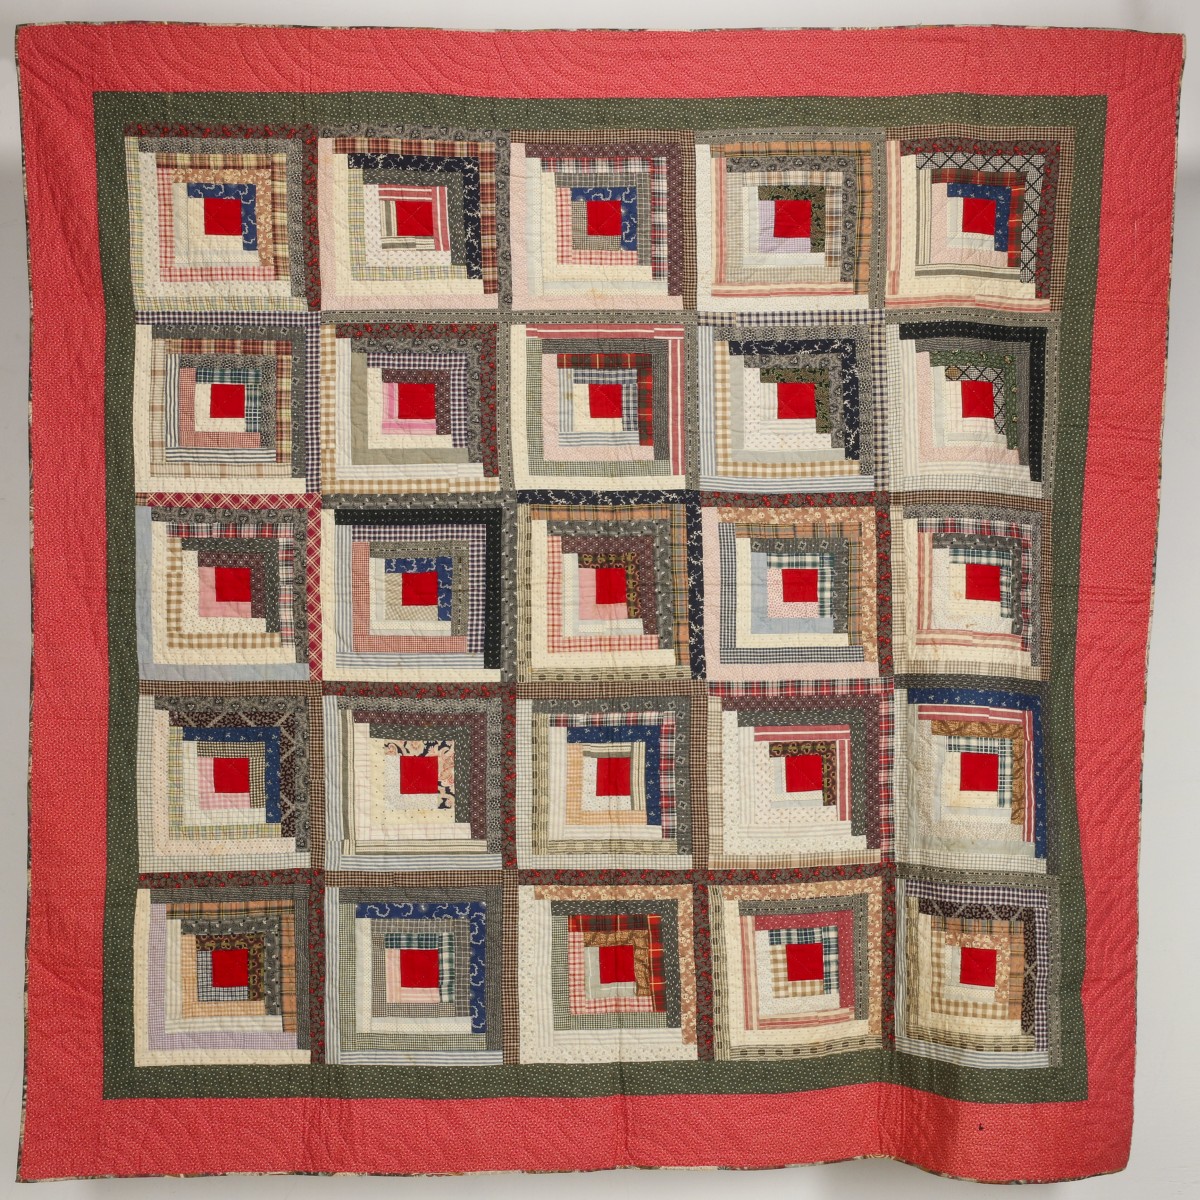 A NICE, OPTIC ANTIQUE CALICO 'LOG CABIN' PATTERN QUILT